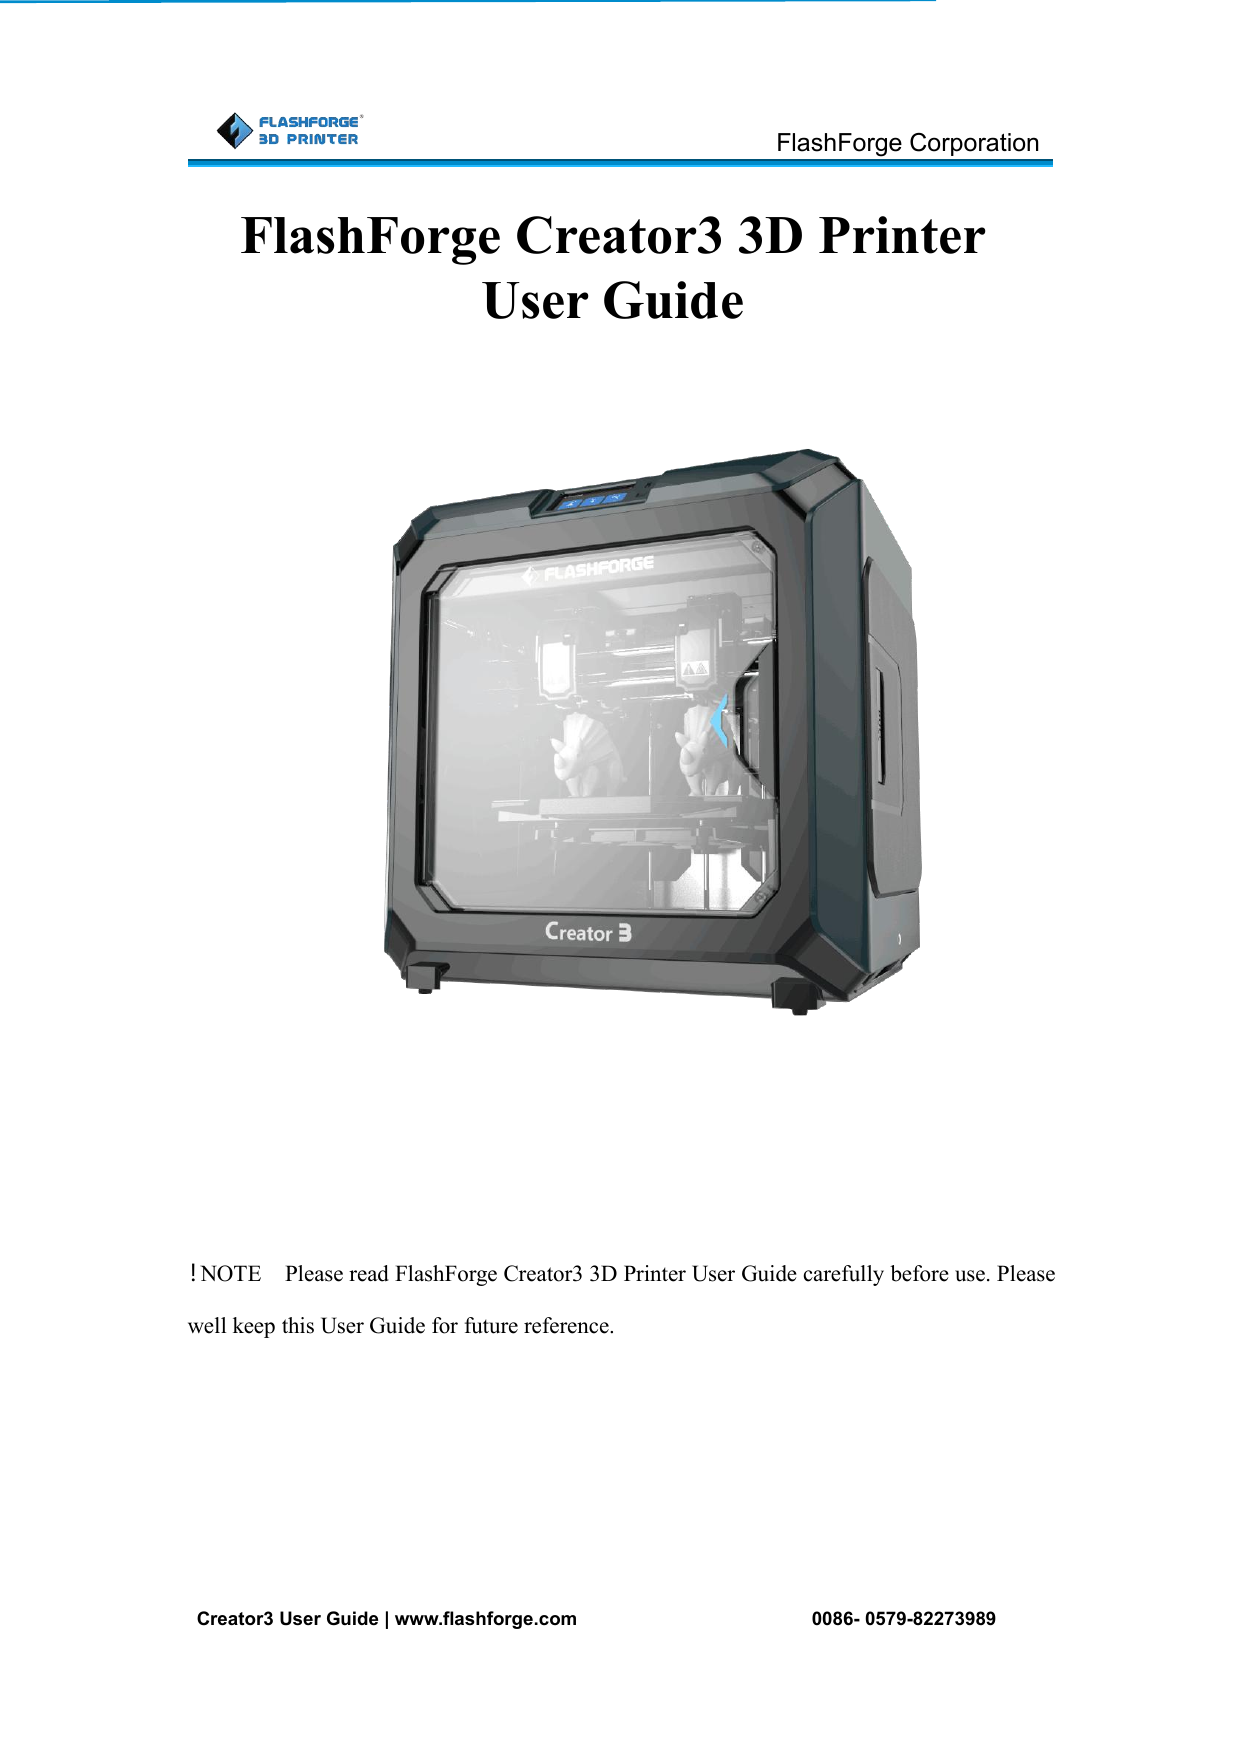 FlashForge CorporationCreator3 User Guide | www.flashforge.com 0086- 0579-82273989！NOTE Please read FlashForge Creator3 3D Printer User Guide carefully before use. Pleasewell keep this User Guide for future reference.FlashForge Creator3 3D PrinterUser Guide